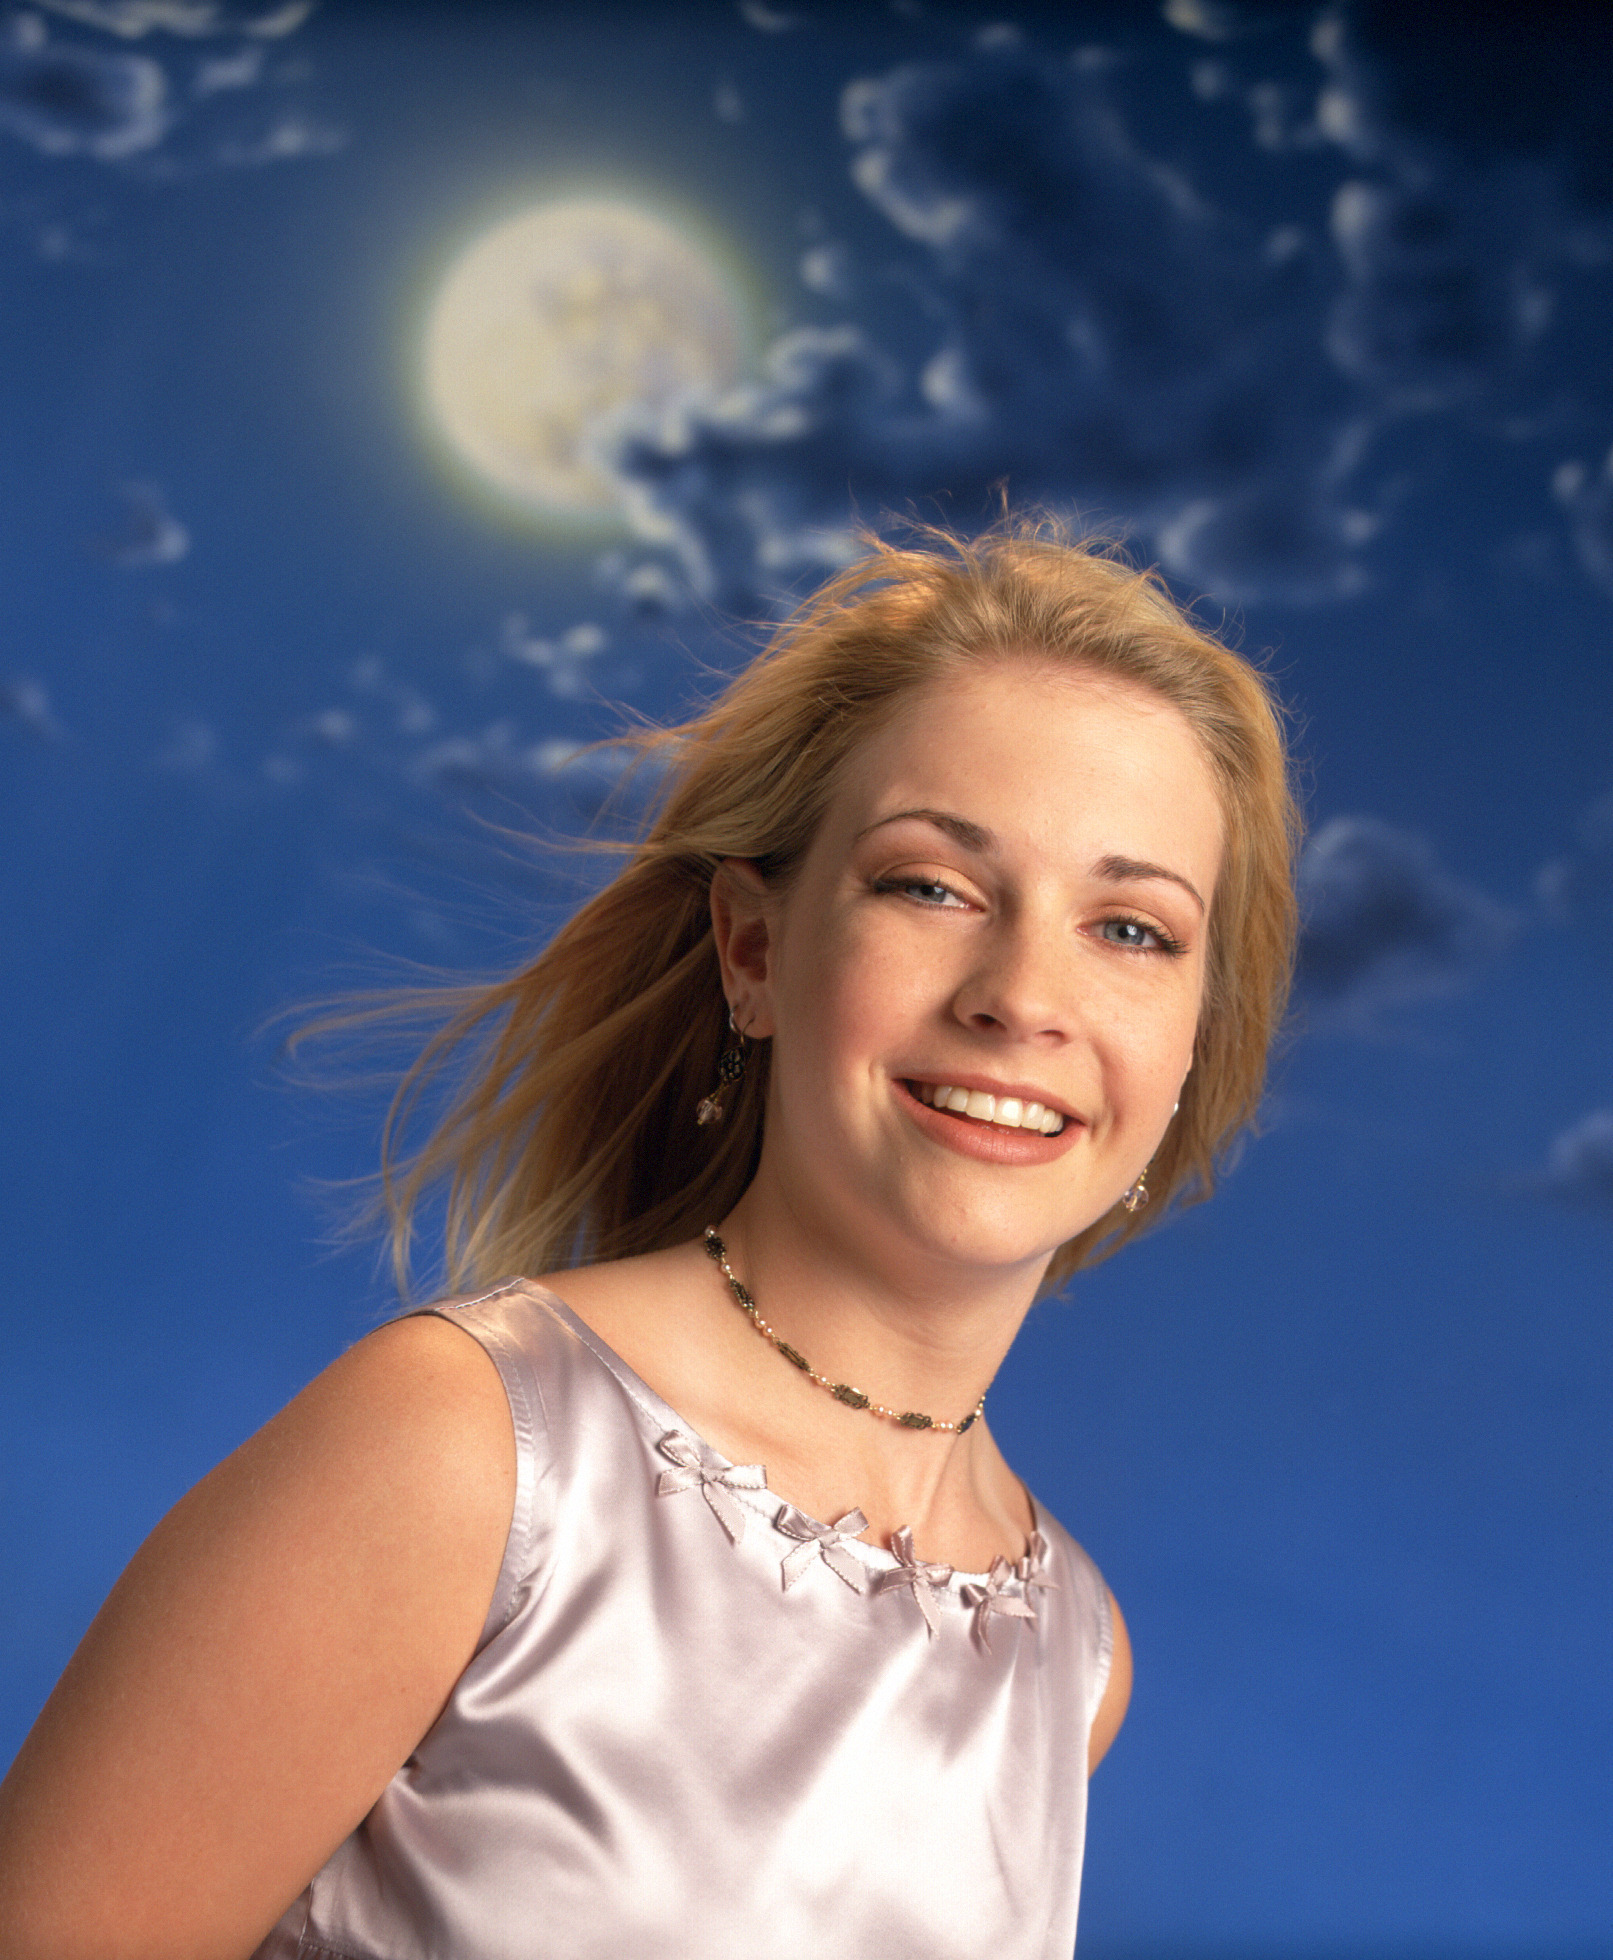 The child star as Sabrina, a nice, adolescent witch in "Sabrina the Teenage Witch" 1996. | Source: Getty Images